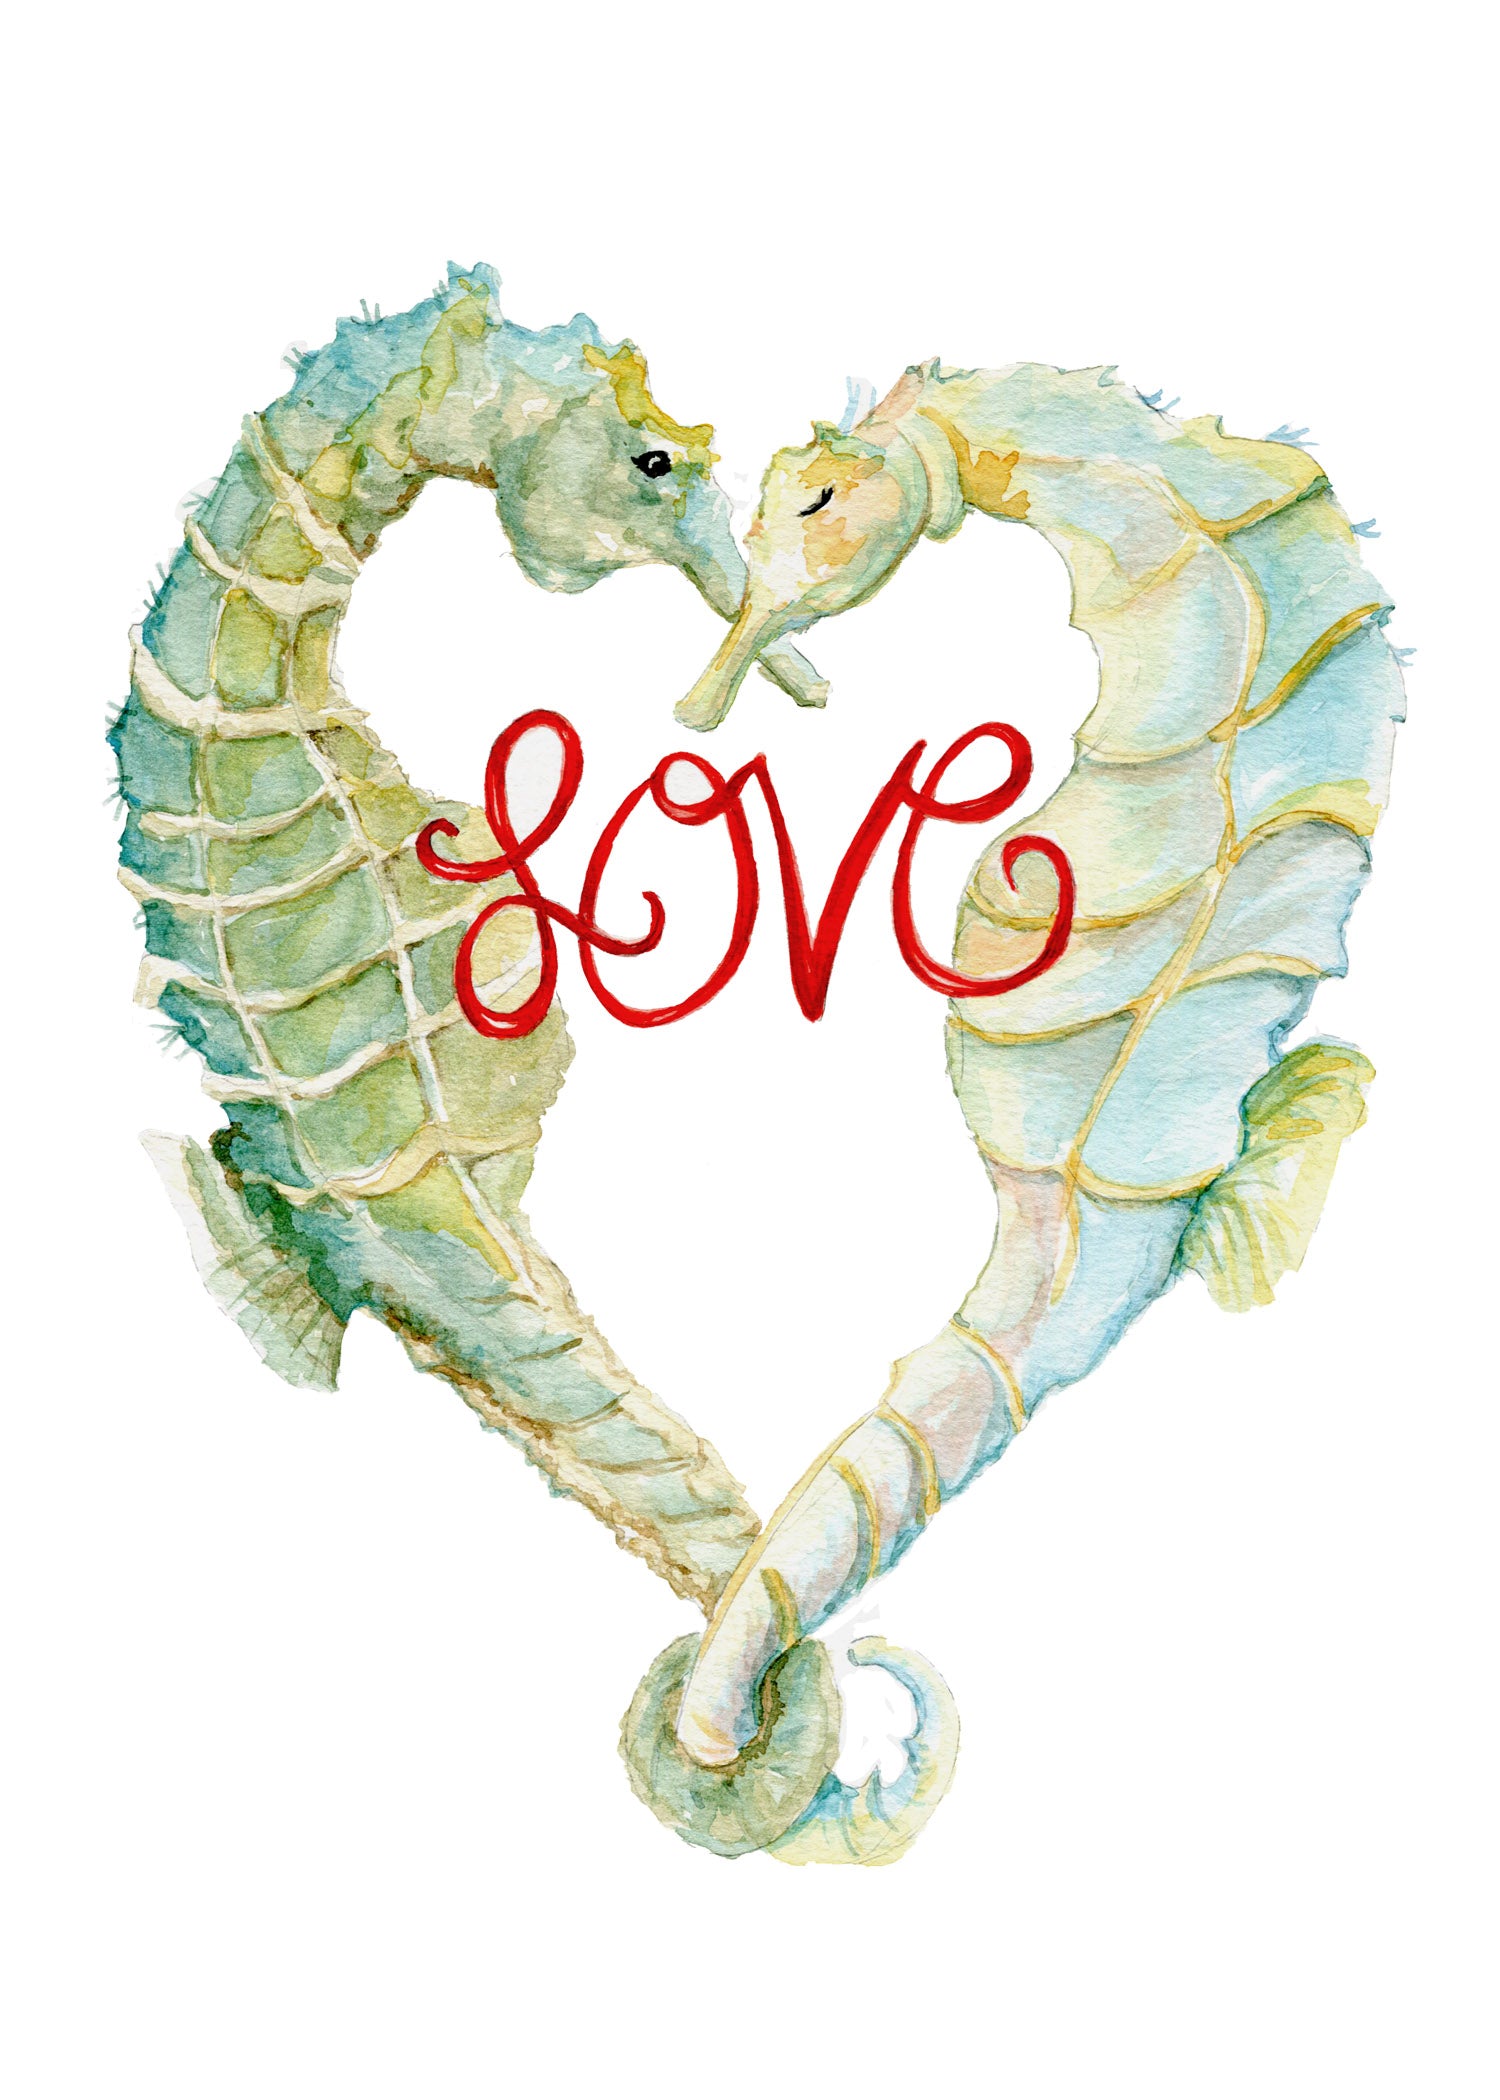 Love Seahorse Watercolor Print on Wood Block - Flamingo Shores - Original Art for Home Decor and Gifts